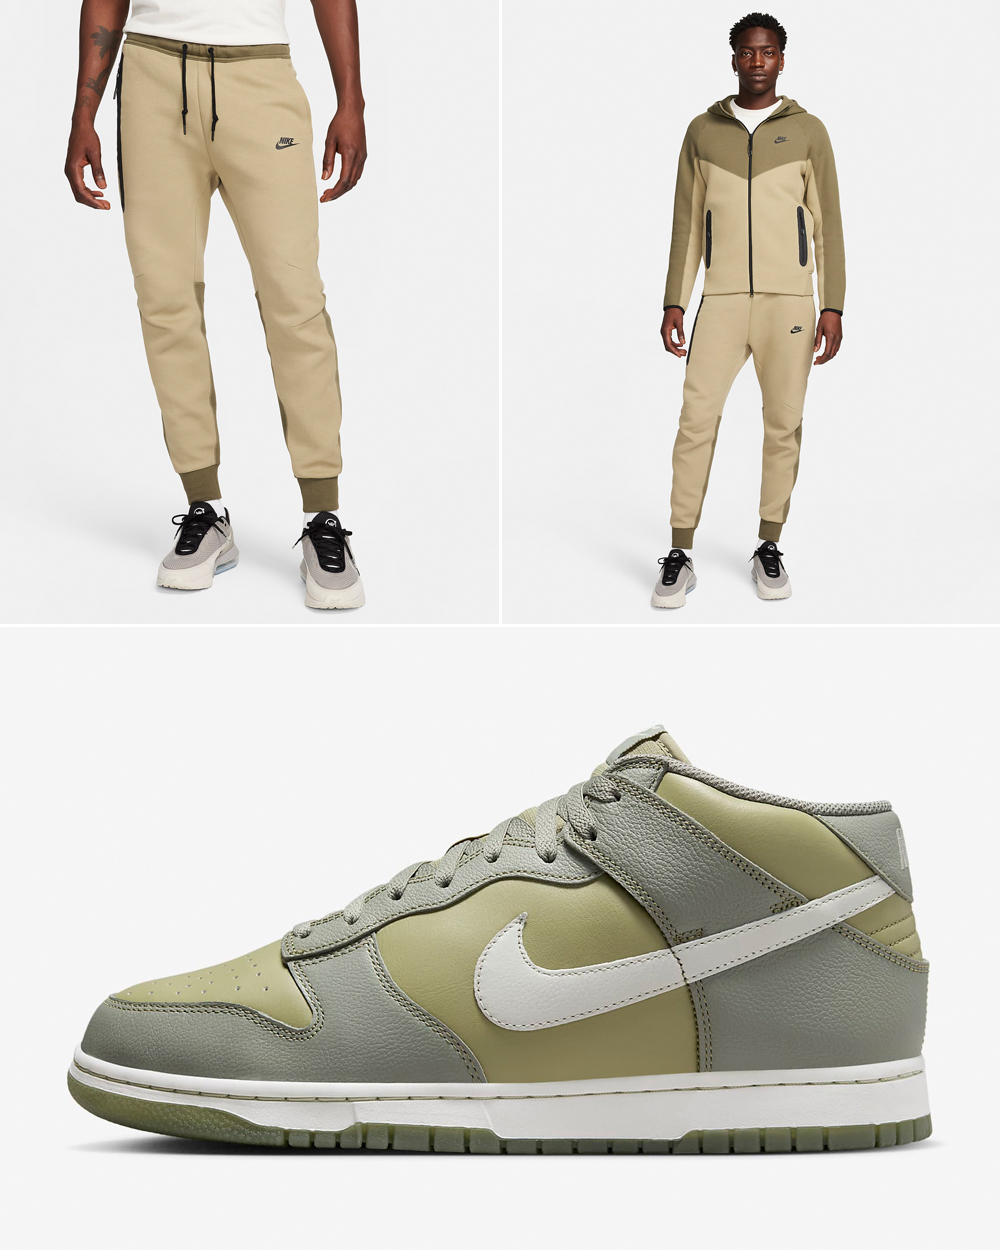 Nike Dunk Mid Dark Stucco Neutral Olive Hoodie Pants Matching Outfit